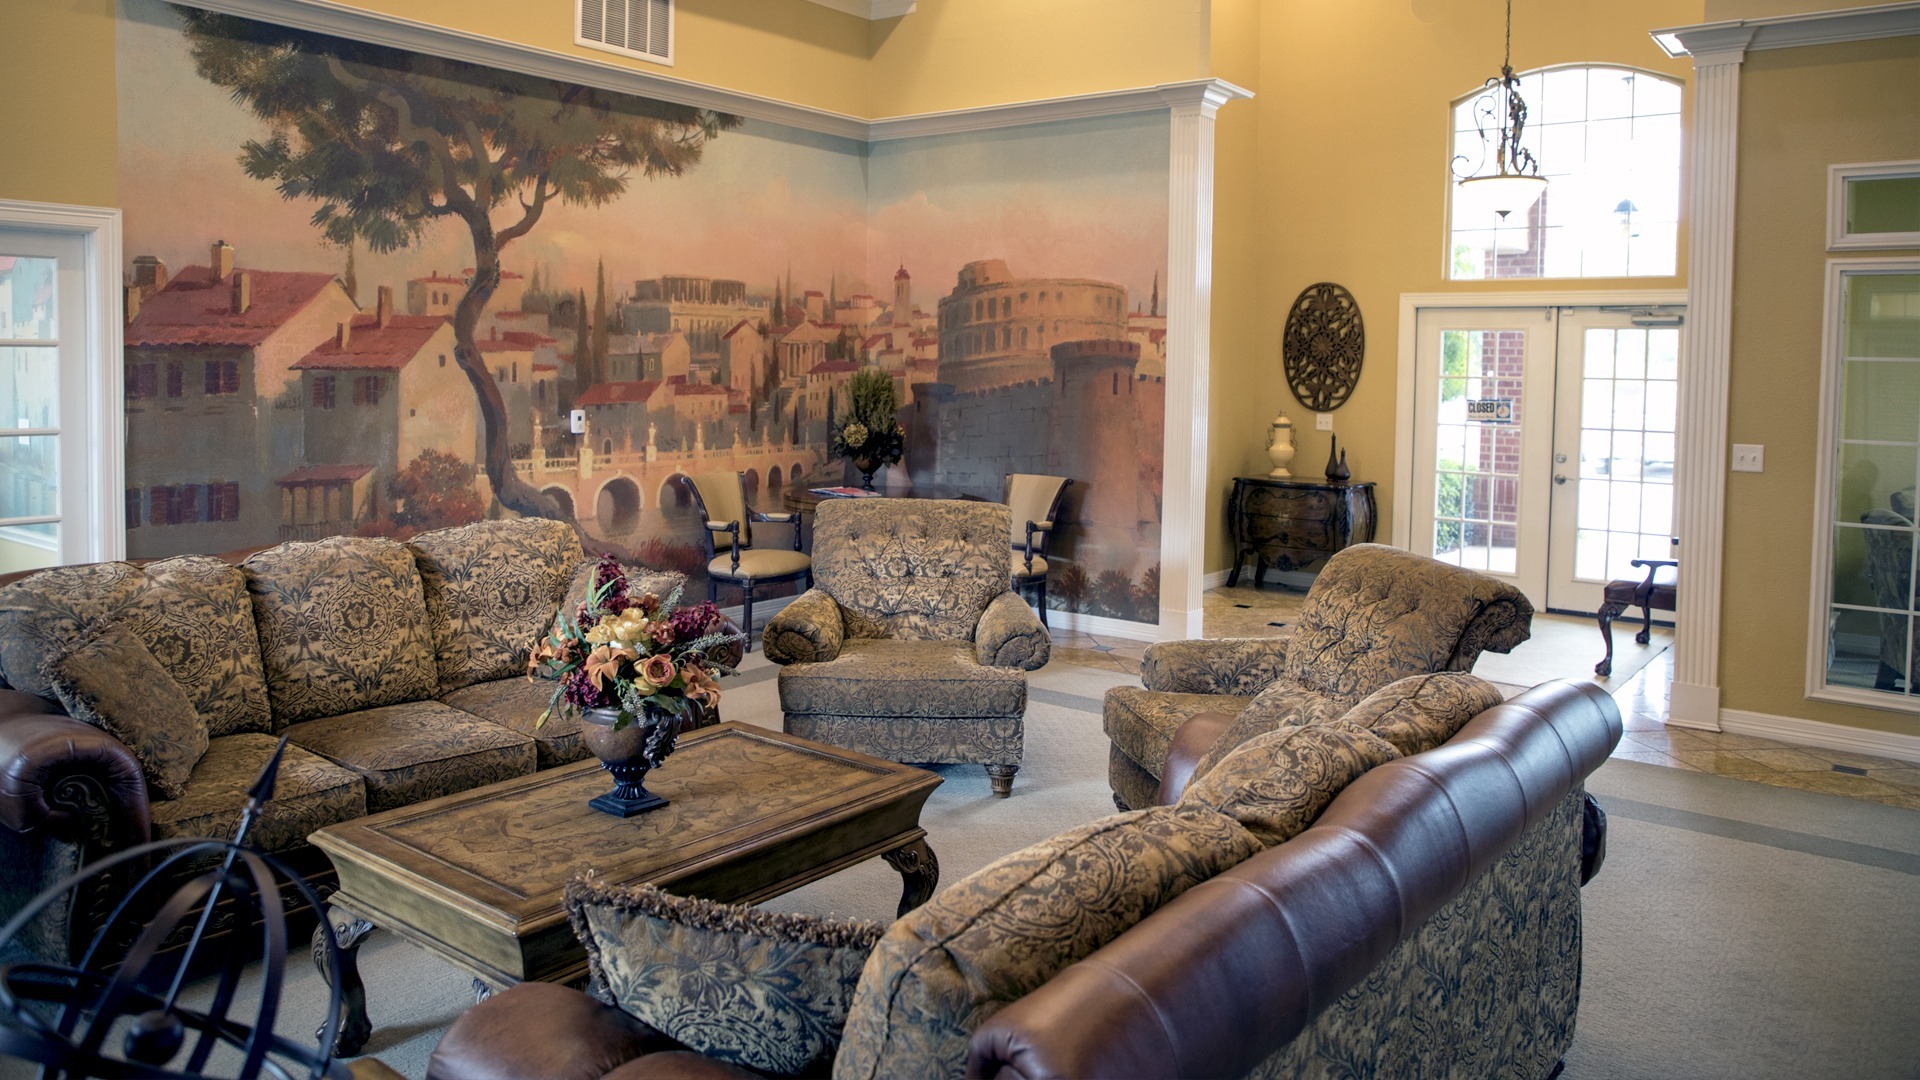 Stone Creek Apartments Welcome Center interior couches and chairs with a mural of Rome on the wall behind